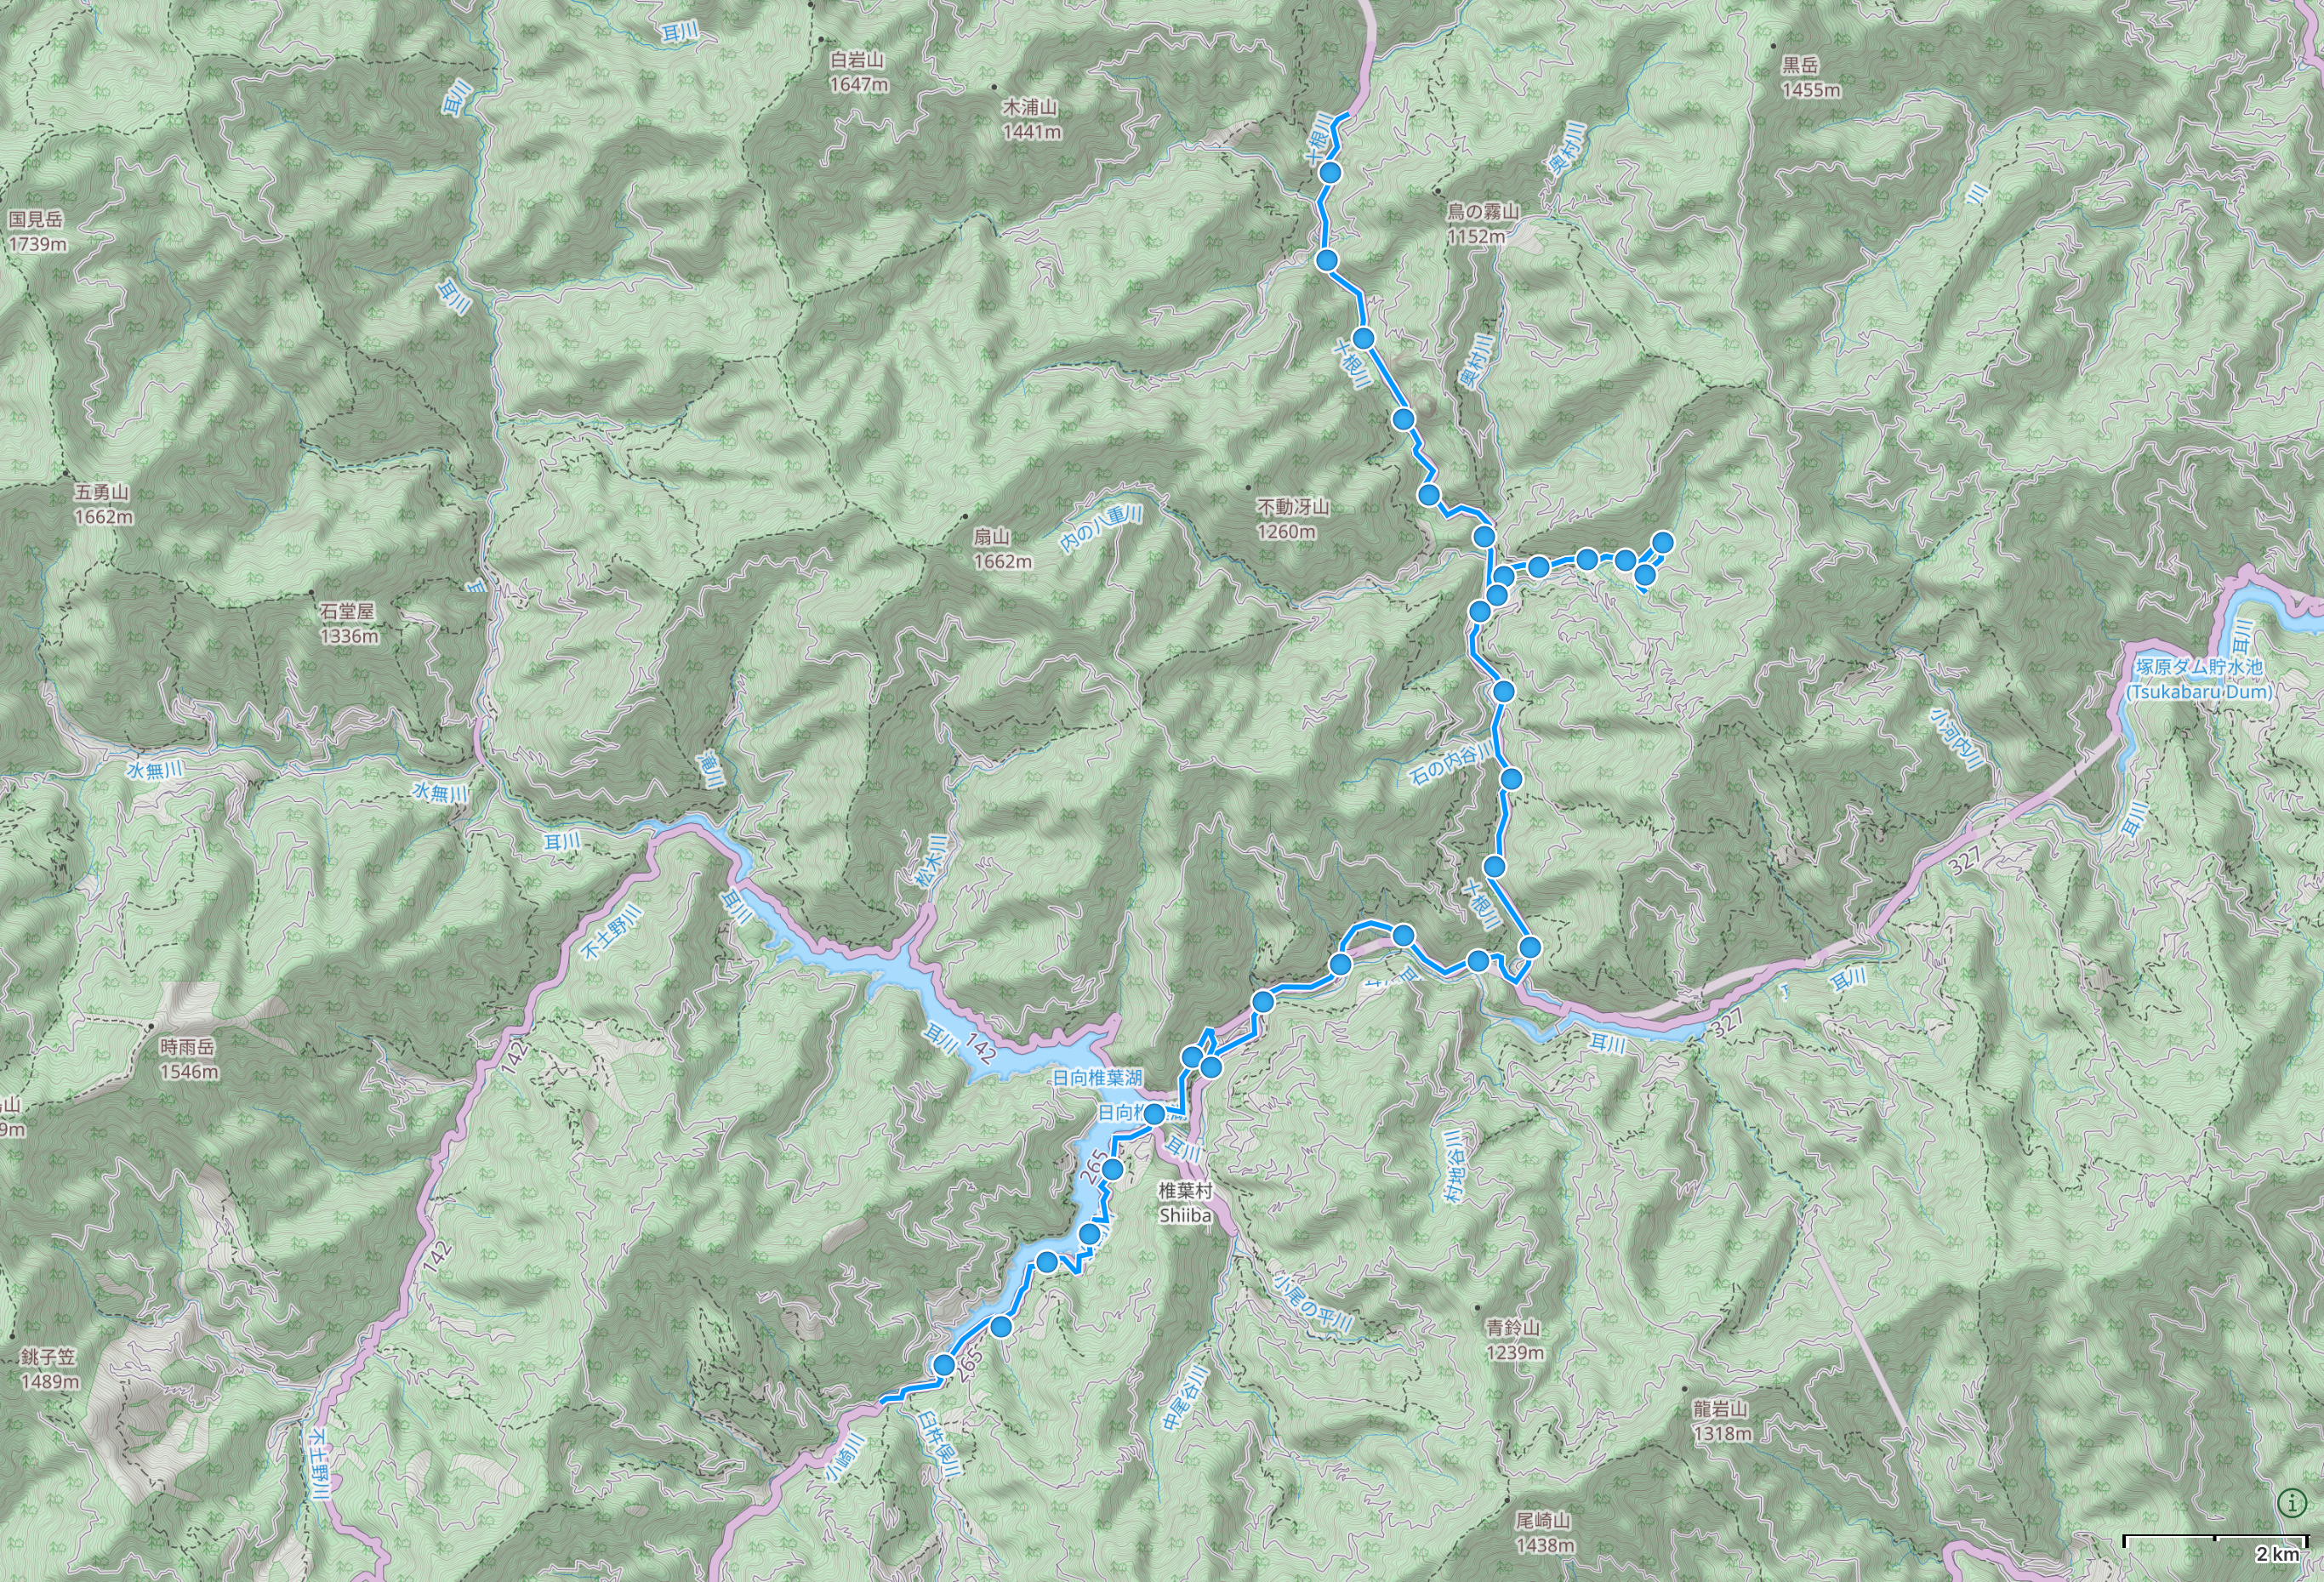 Map of Miyazaki with author’s route across the valleys of Shiiba highlighted.